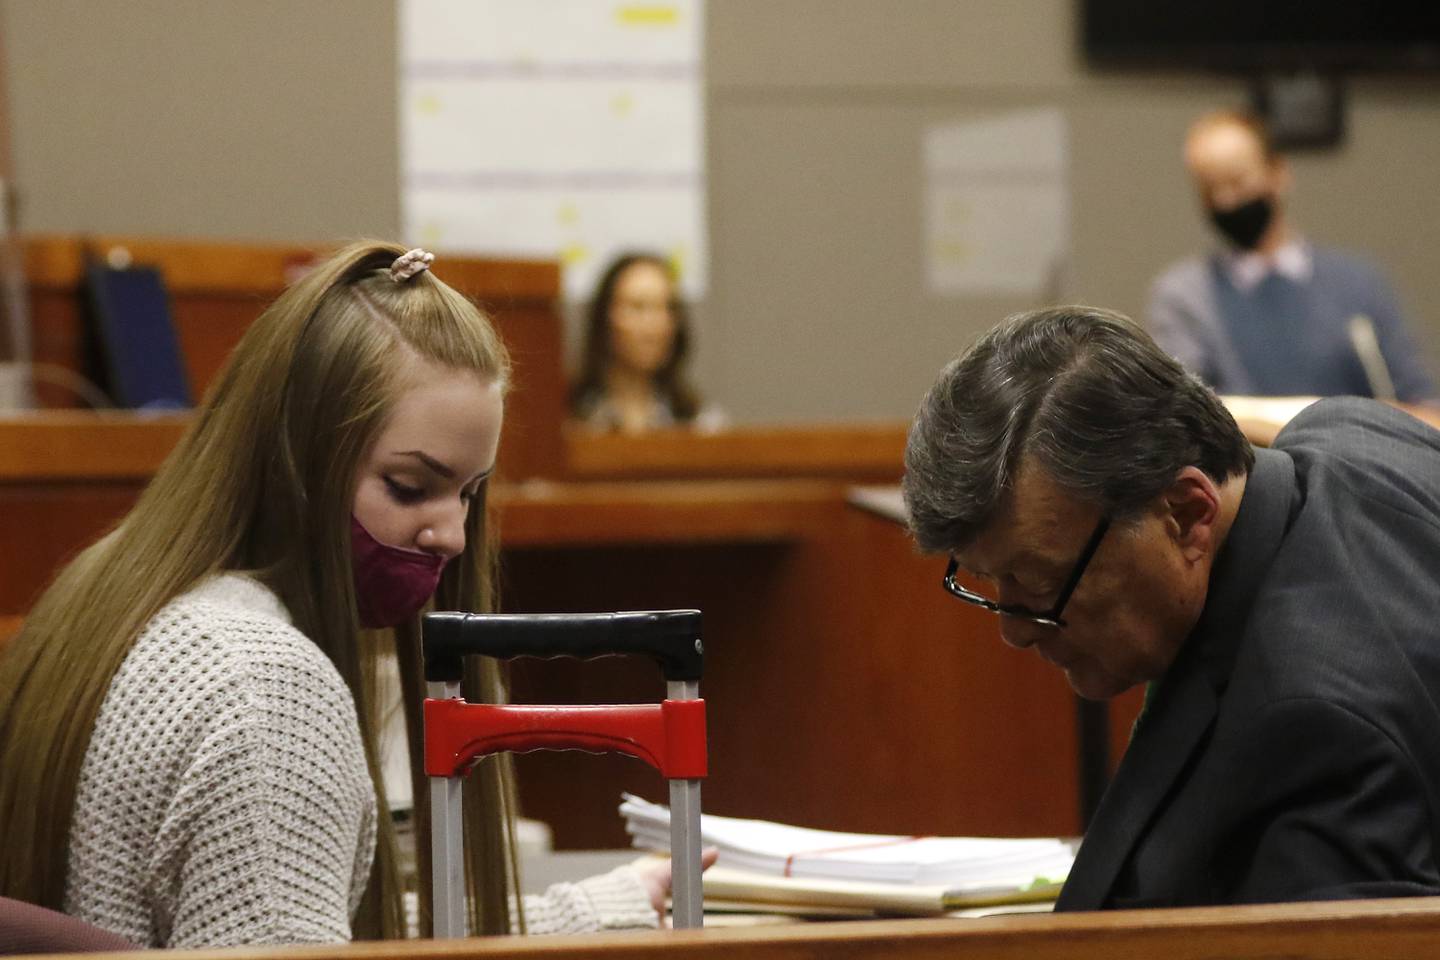 Veronica Kubiak, left, and attorney Ernest Blomquist are seen during trial Monday, Nov. 22, 2021, at the Michael J. Sullivan Judicial Center in Woodstock.